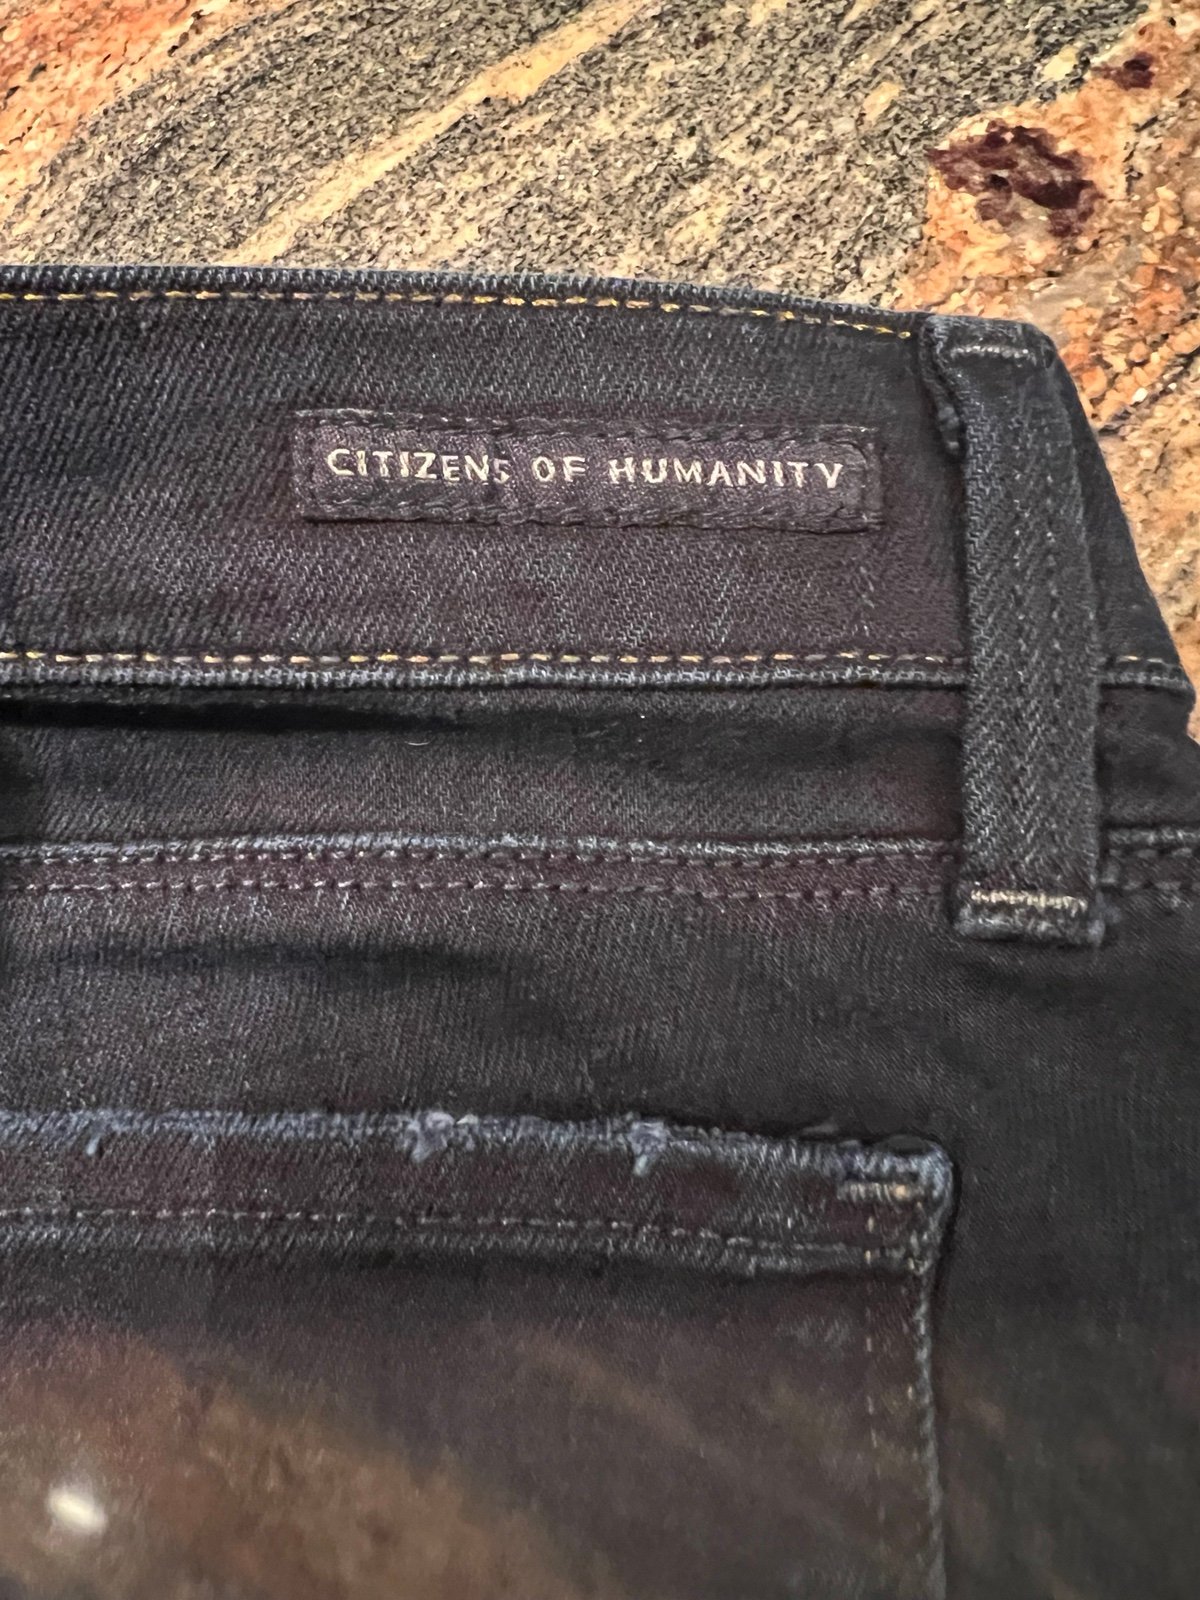 Exclusive Citizens Of Humanity Jeans KyOHxLz0I hot sale